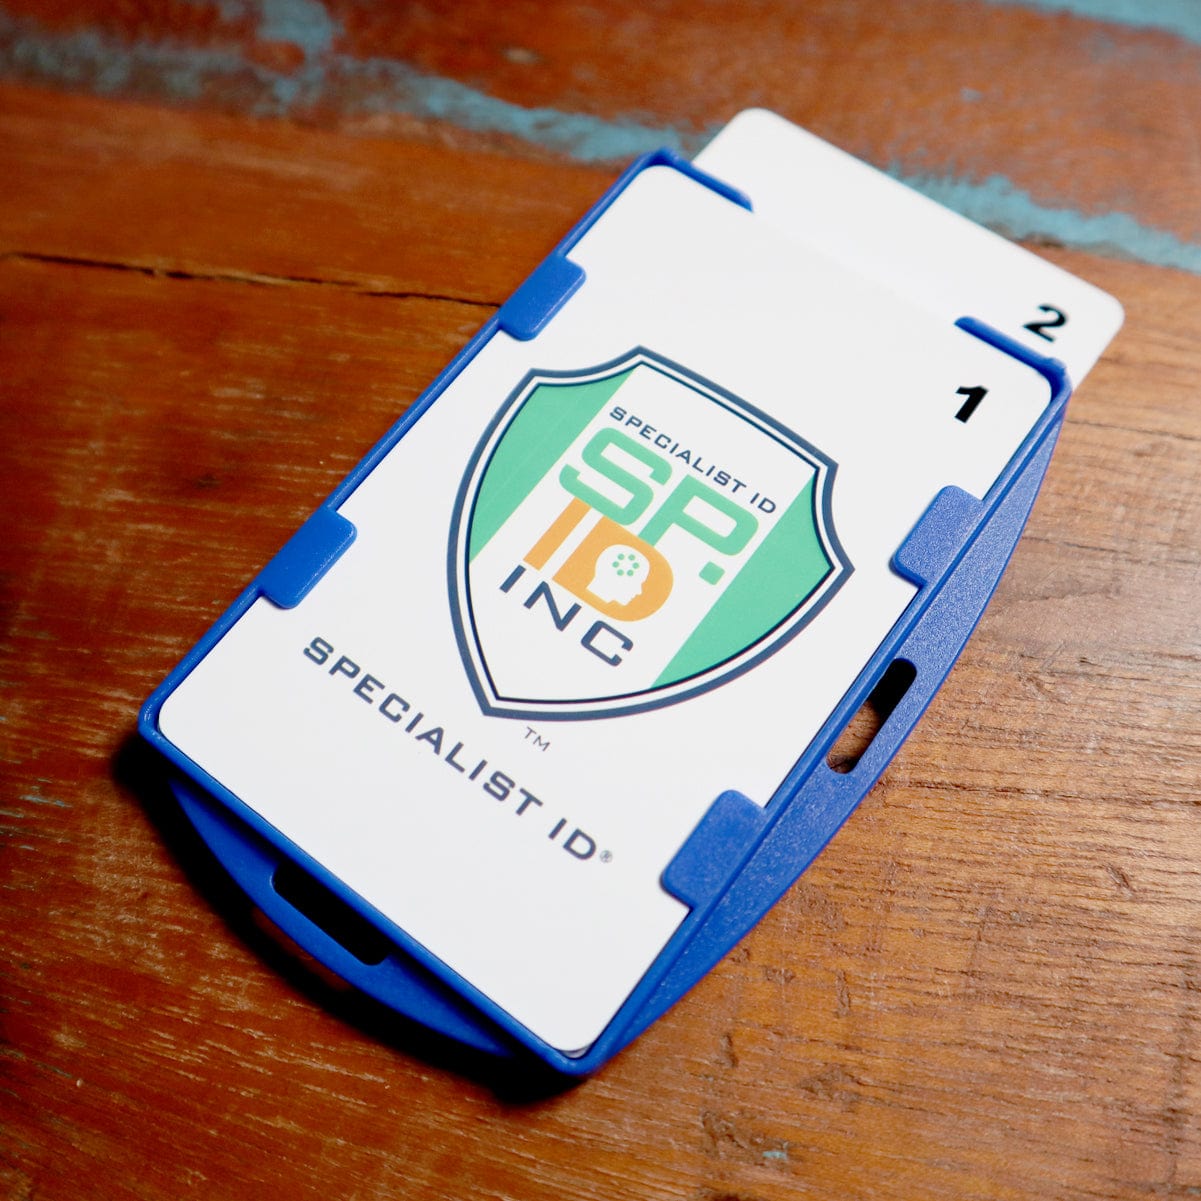 A SkimSAFE FIPS 201 RFID Blocking 2-Card ID Holder (AH-210) securely holding cards with the 'Specialist ID Inc' logo, featuring RFID blocking for enhanced security.